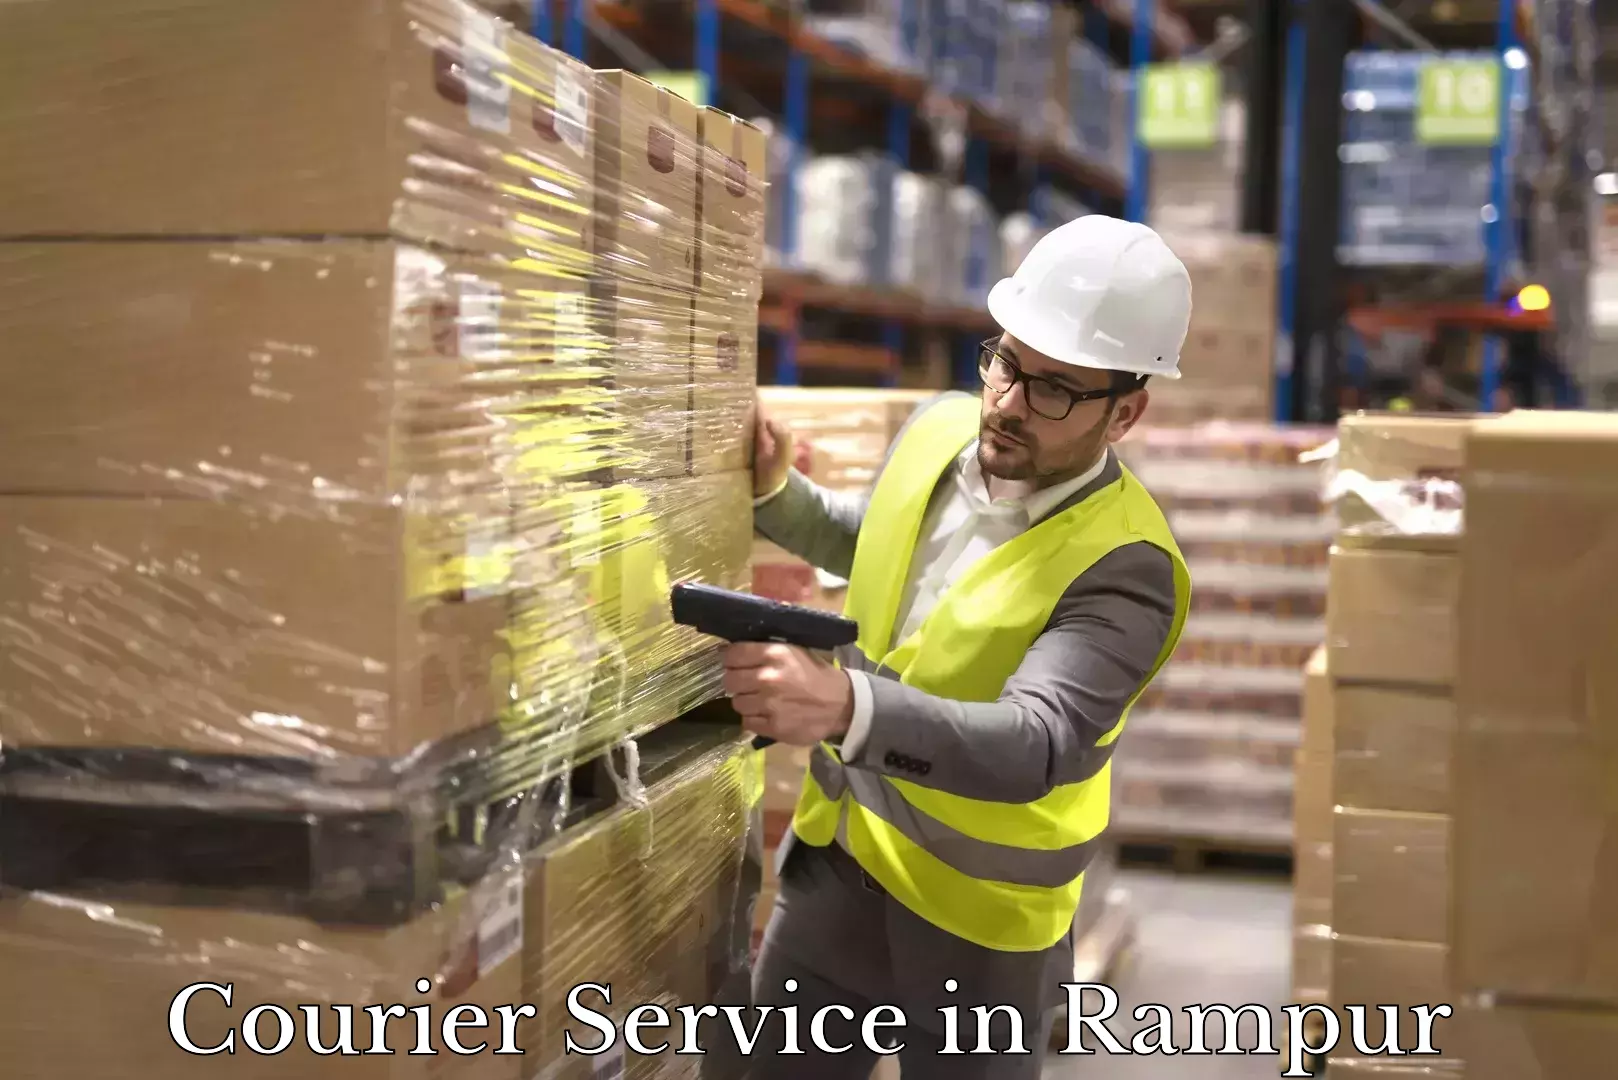 Comprehensive shipping network in Rampur